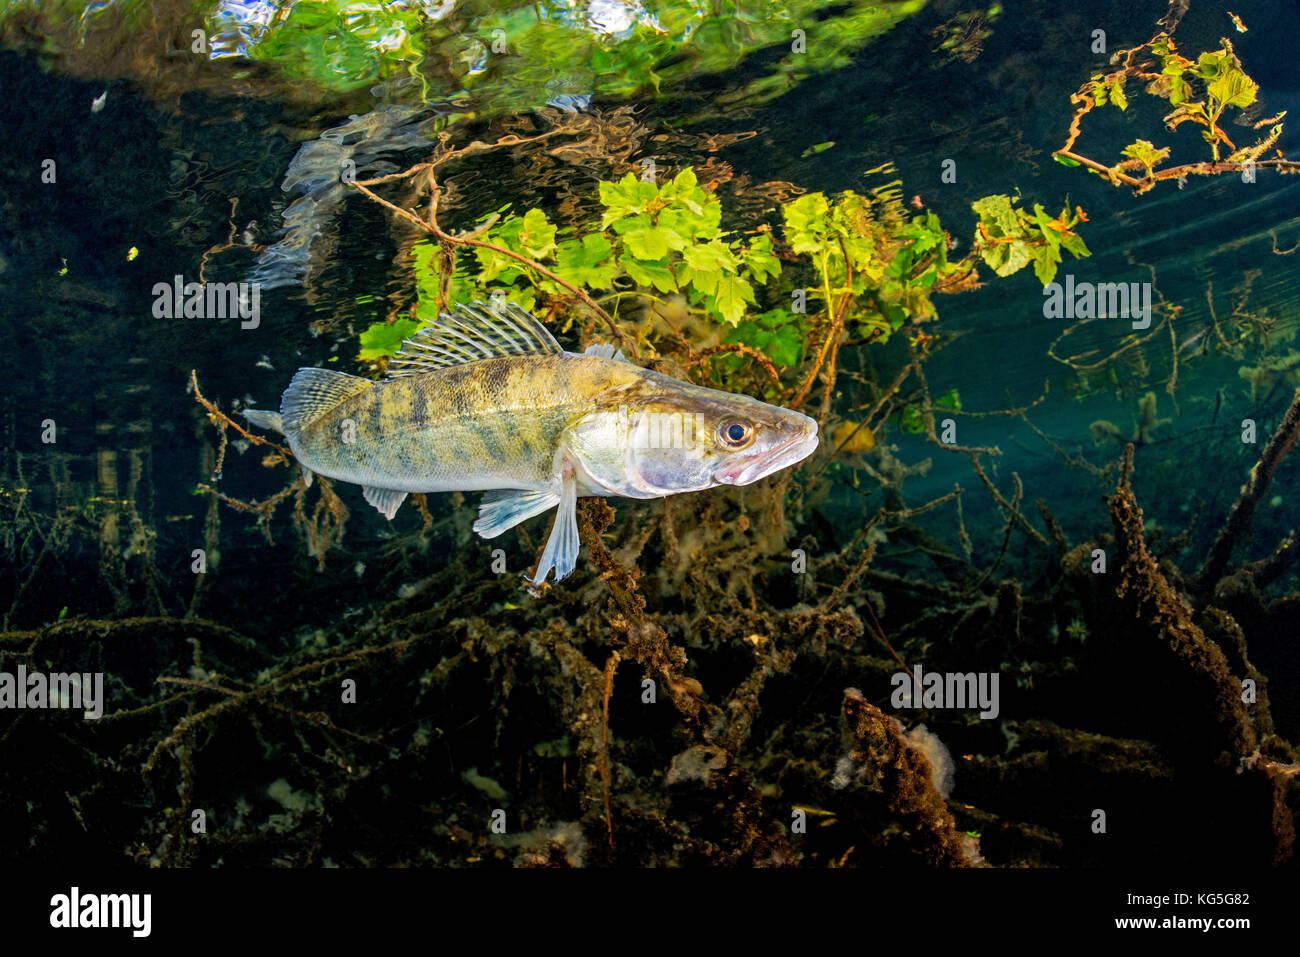 Pikeperch, Sander lucioperca, lake, roots, water surface Stock Photo